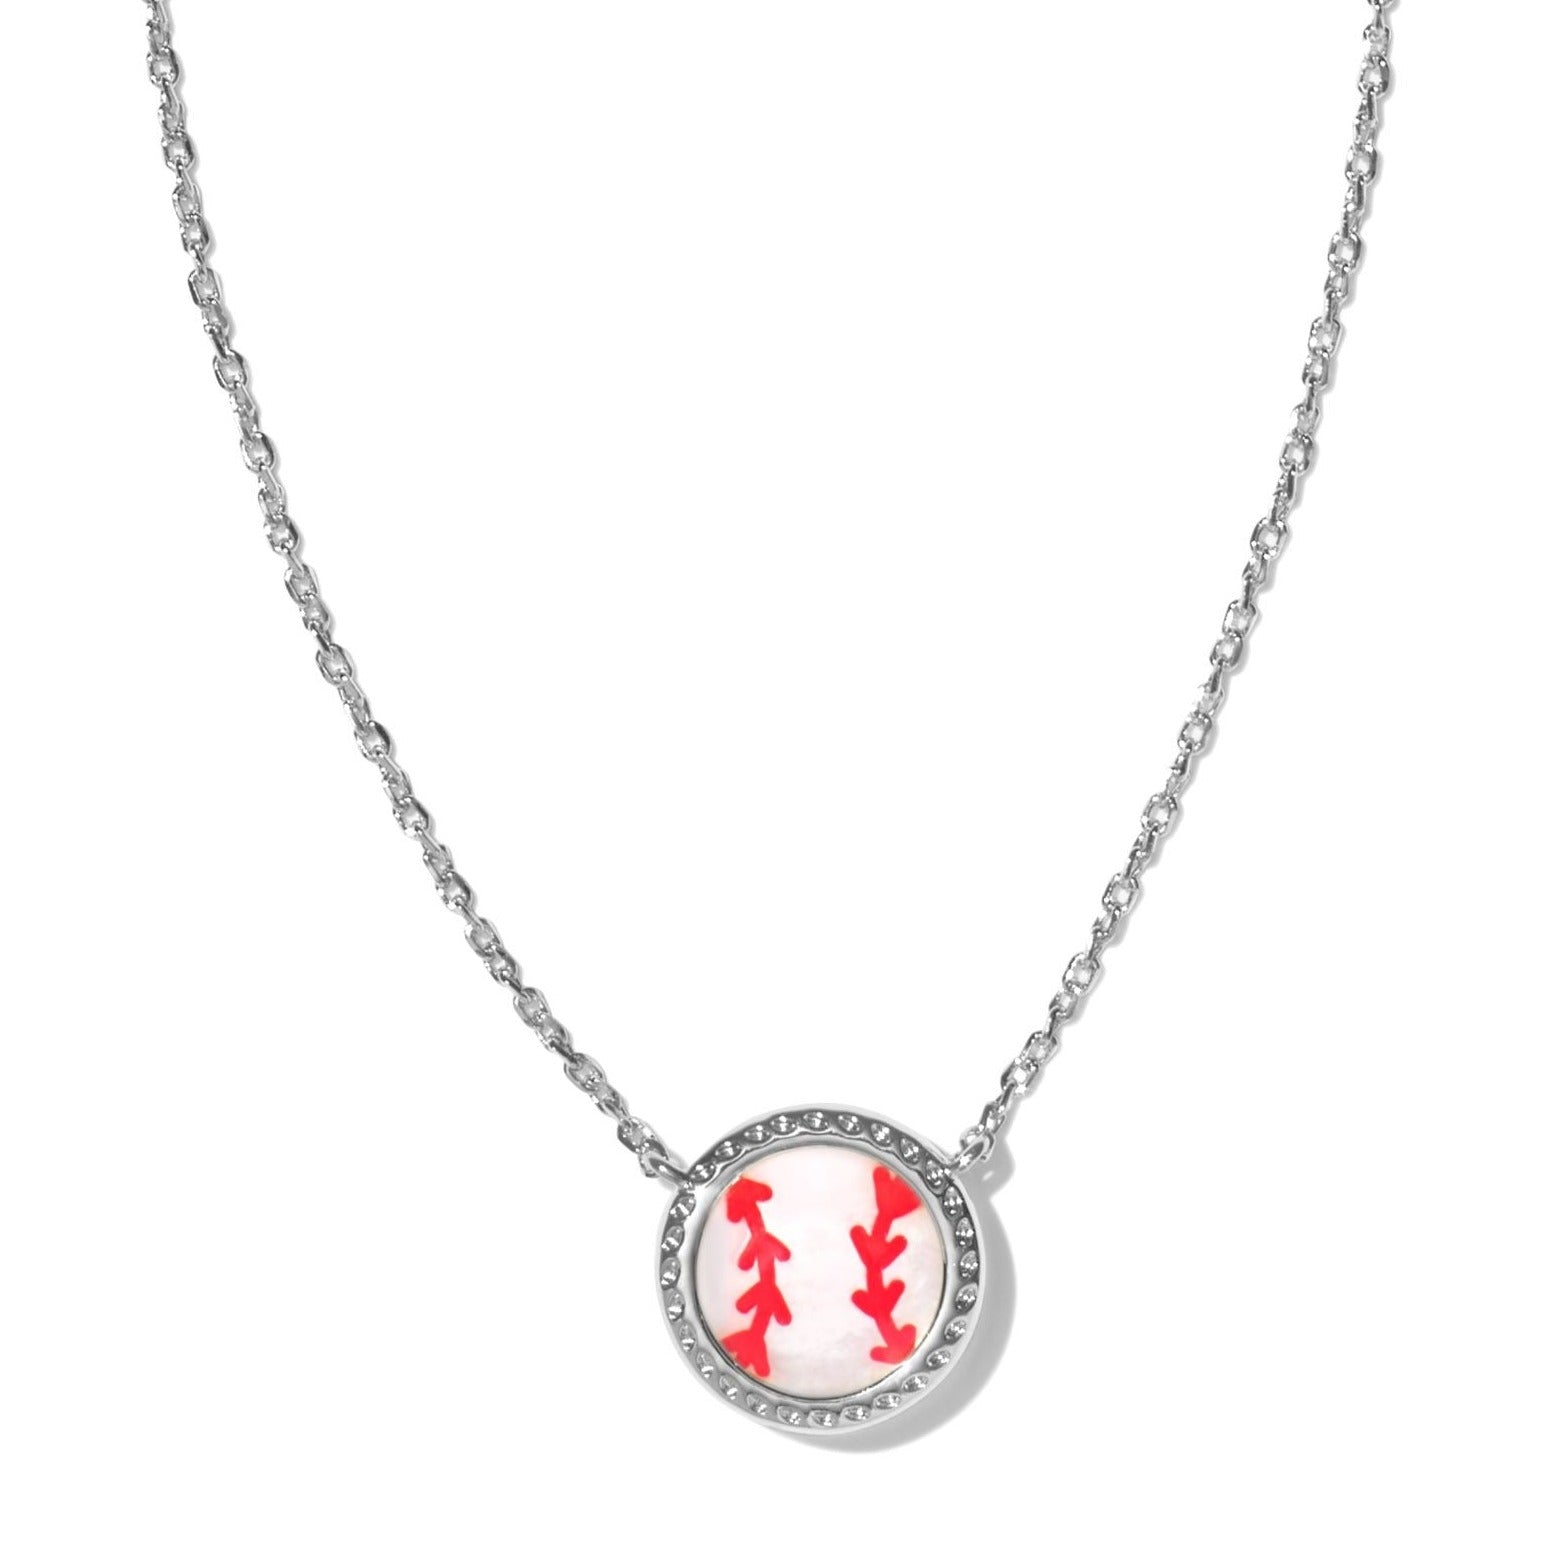 Kendra Scott | Baseball Silver Short Pendant Necklace in Ivory Mother-of-Pearl - Giddy Up Glamour Boutique